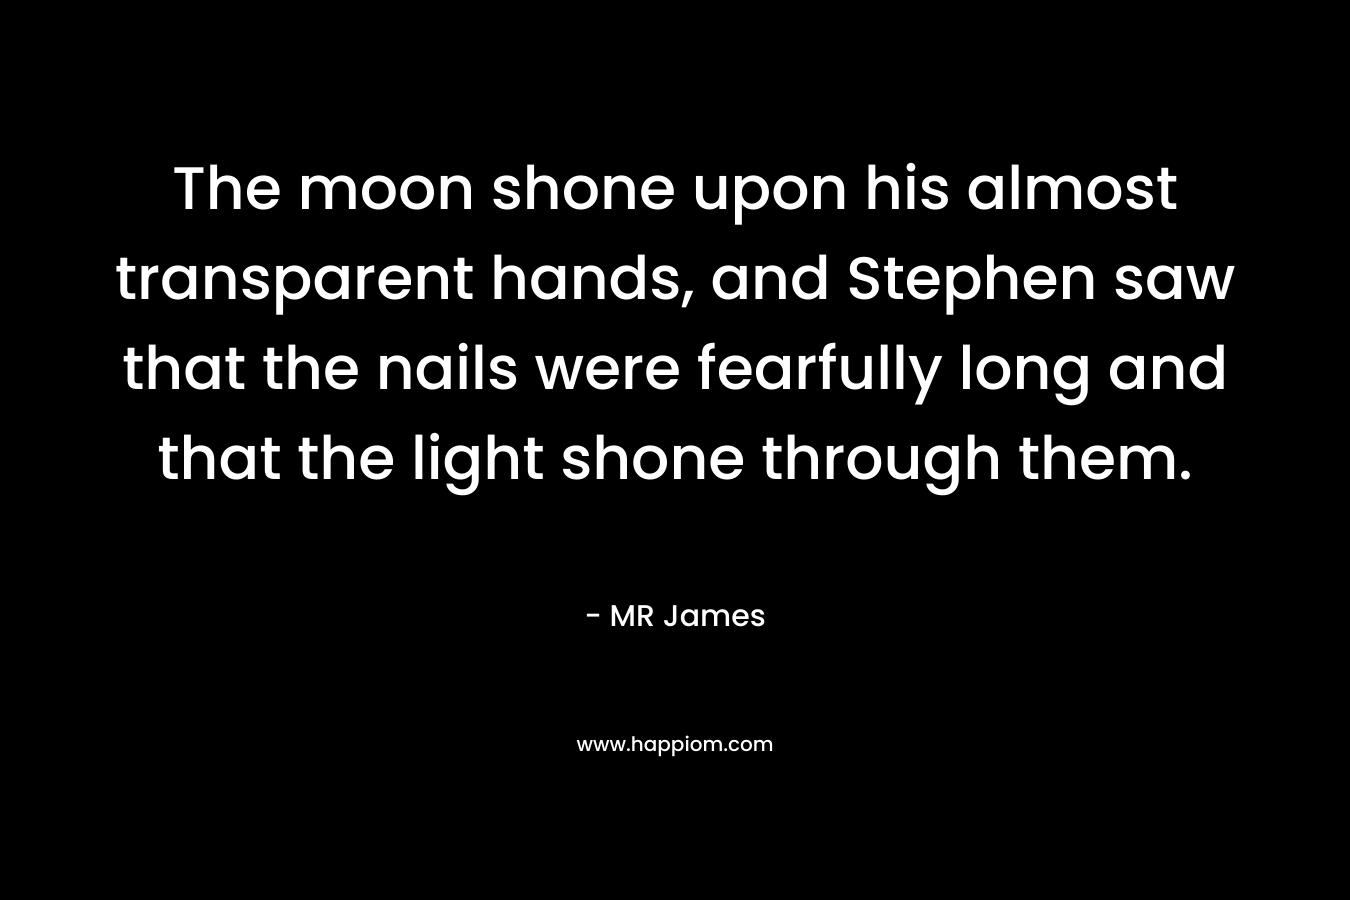 The moon shone upon his almost transparent hands, and Stephen saw that the nails were fearfully long and that the light shone through them. – MR James